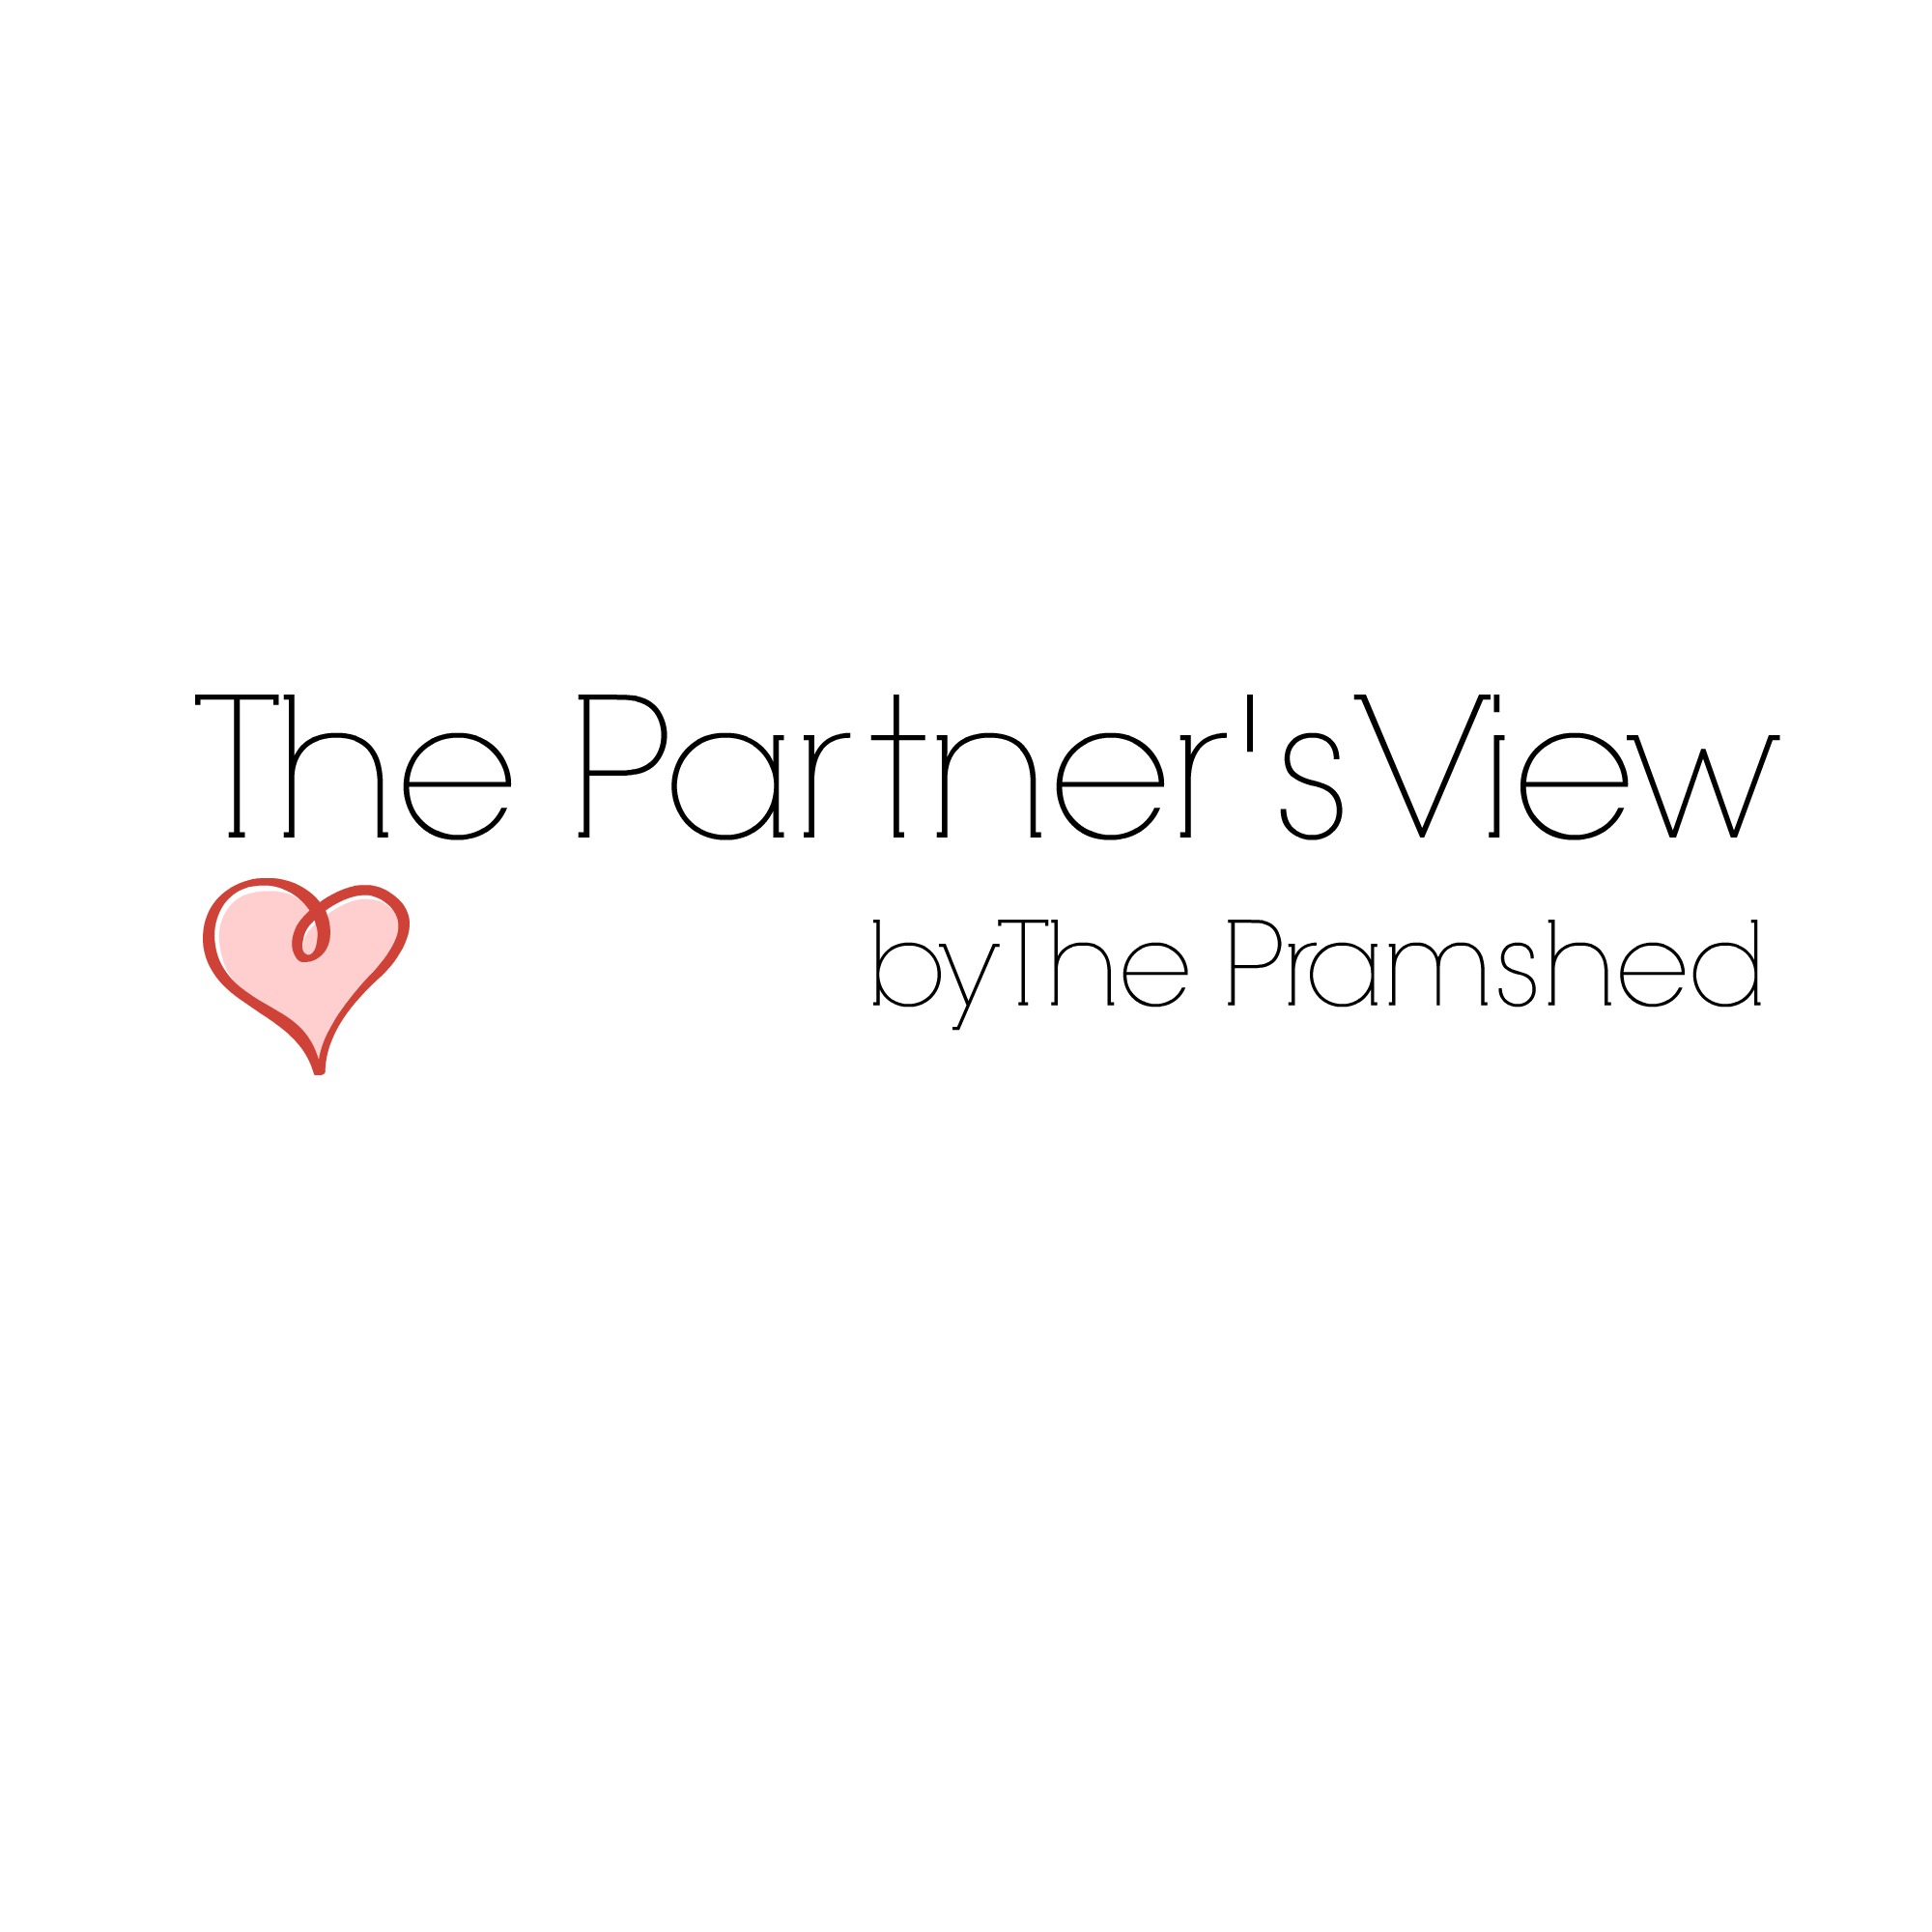 The Partner's View